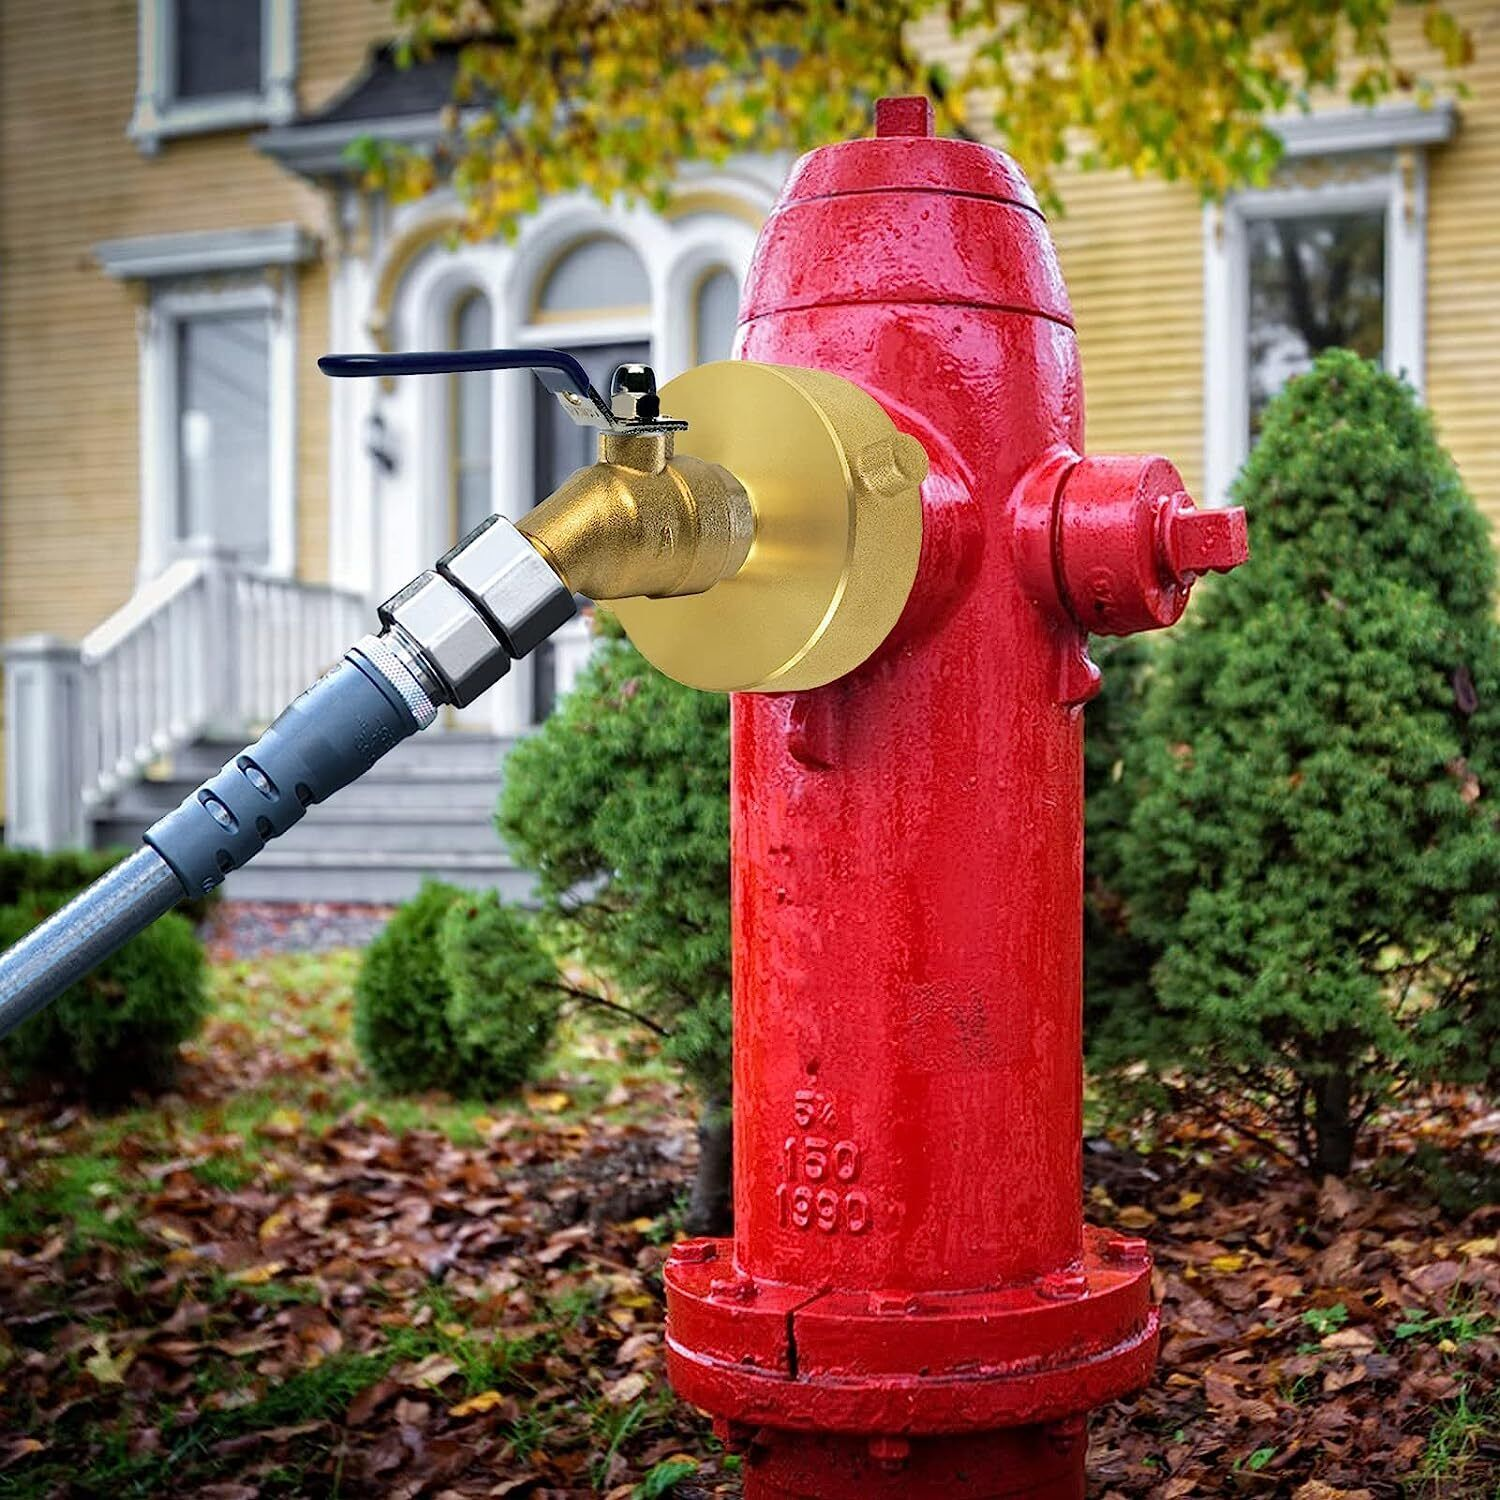 Fire hydrant with garden hose adapter